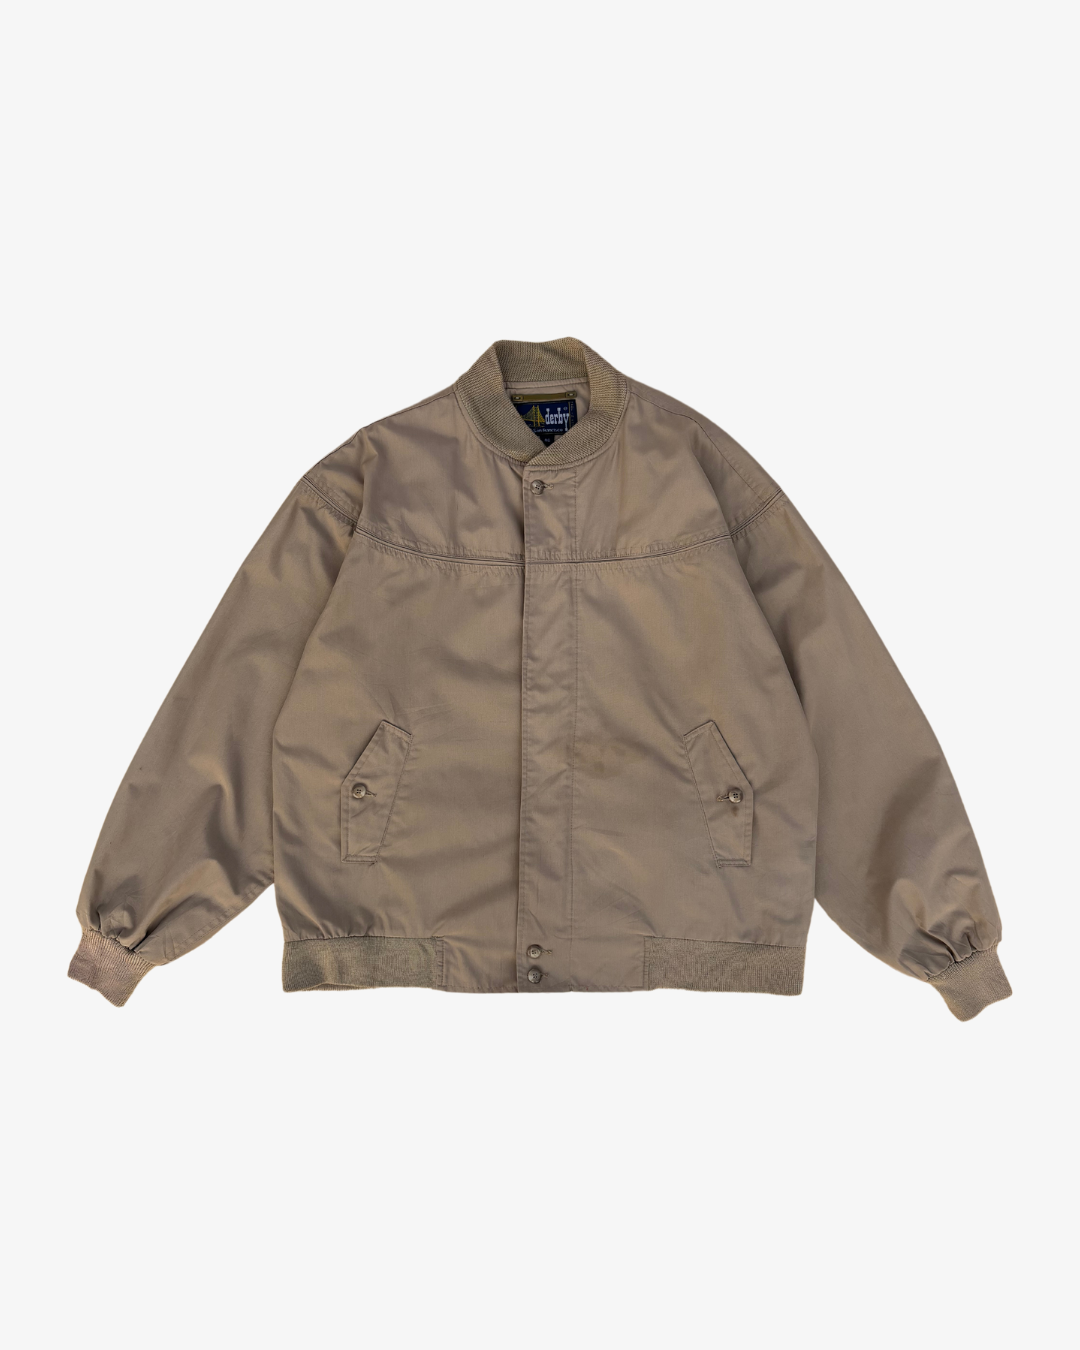 BOMBER JACKET BY DERBY